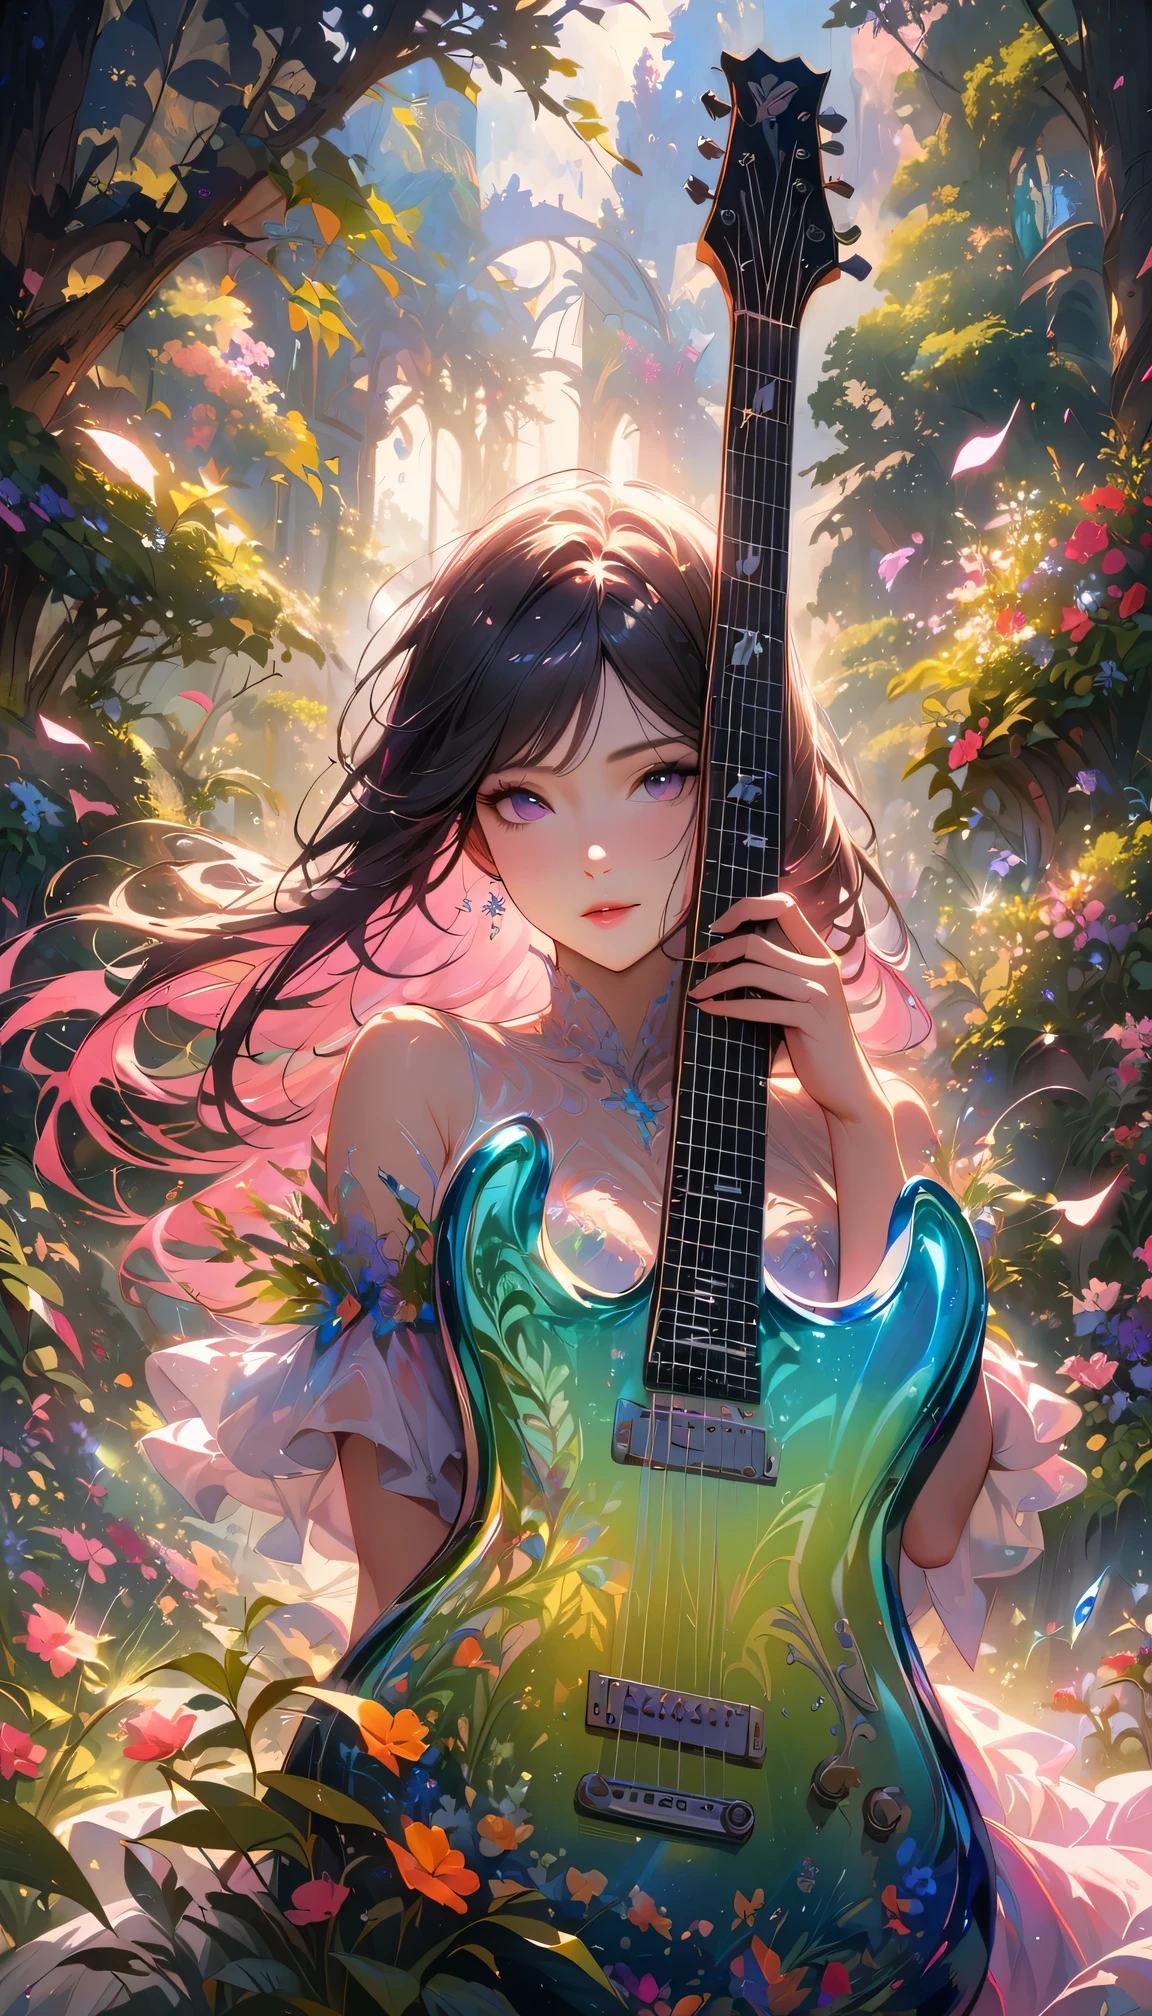 (best quality,4k,8k,highres,masterpiece:1.2),ultra-detailed,realistic,crystal-clear guitar carving,translucent morning of spring,sunlight reflection on guitar,body details,delicate strings,vibrant color palette,sculpting tools,hourglass figure,sound holes,elegant curves,polished surface,delicate engravings,effects of light and shadow,subtle reflections,shimmering surface,sparkling gemstones,flower petals falling,floral patterns,emerald accents throughout,transparent springtime essence,ethereal atmosphere,peaceful garden background,serene ambiance,morning dew,soft sunlight filtering through trees,lush greenery,vividly colored blossoms,harmonious blend of nature and art,impeccable craftsmanship,transcendent beauty,awe-inspiring artwork